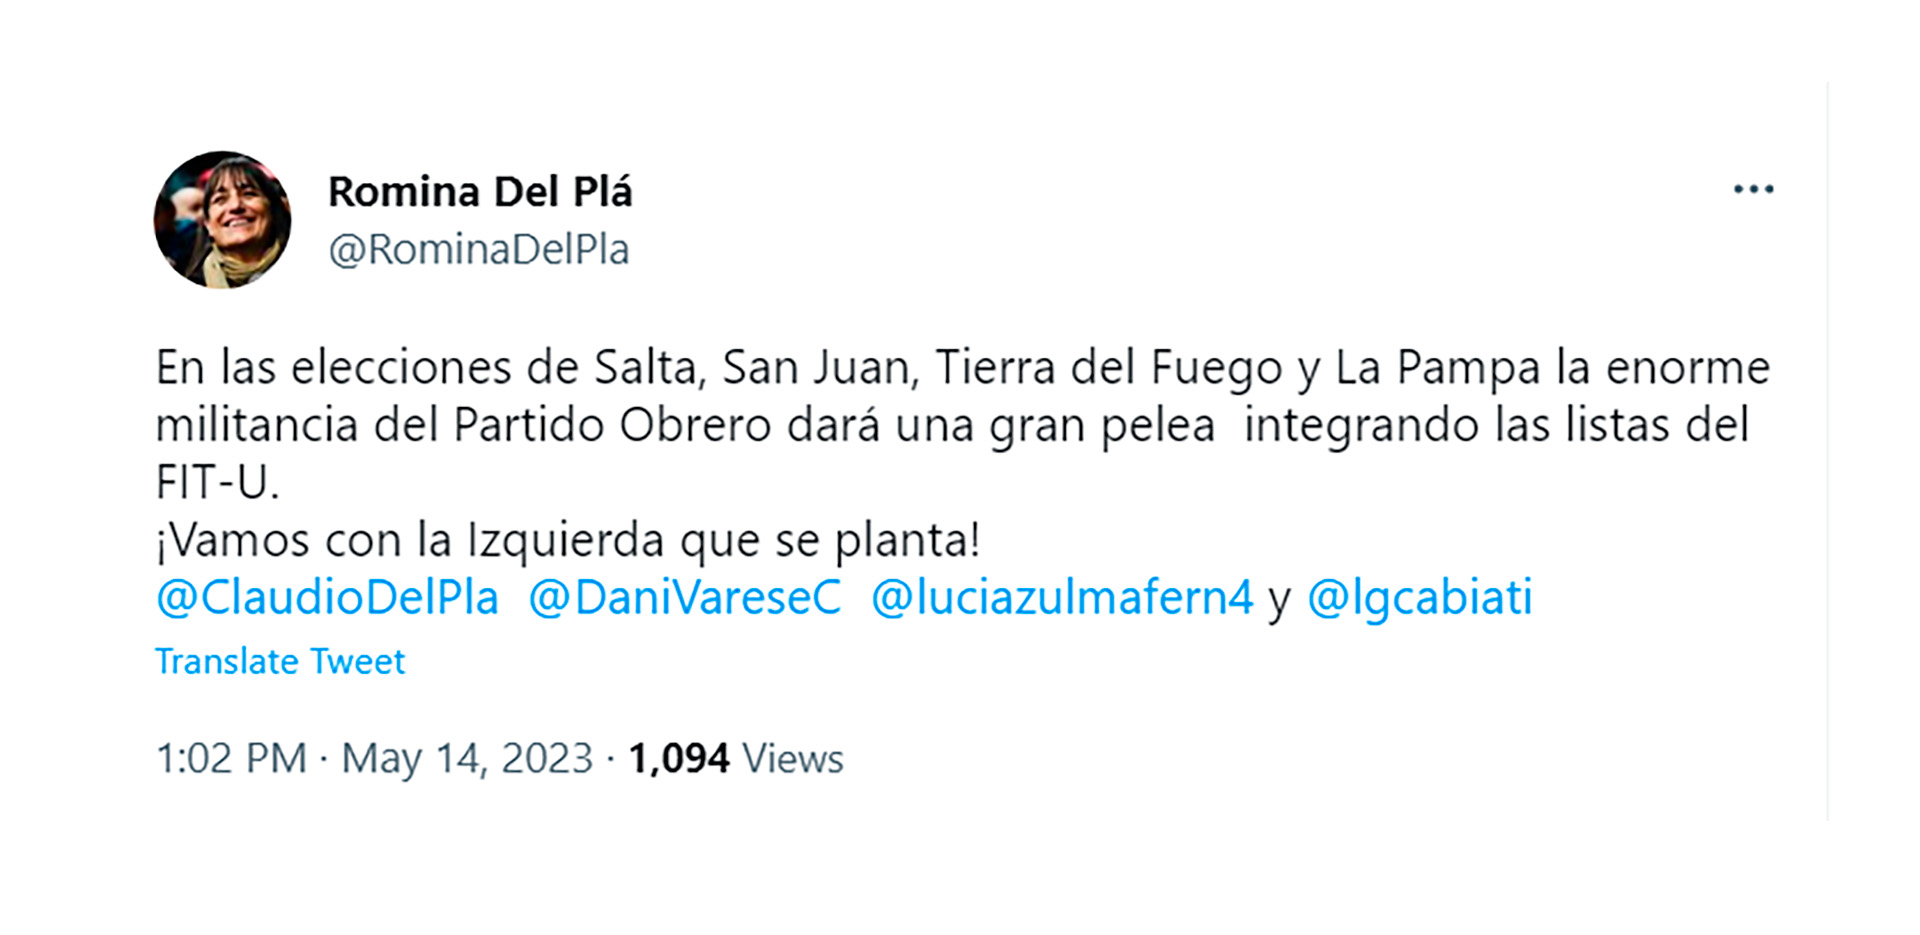 The support of Romina Del Plá to the candidates of the Left in the elections of Salta, San Juan, Tierra del Fuego and La Pampa